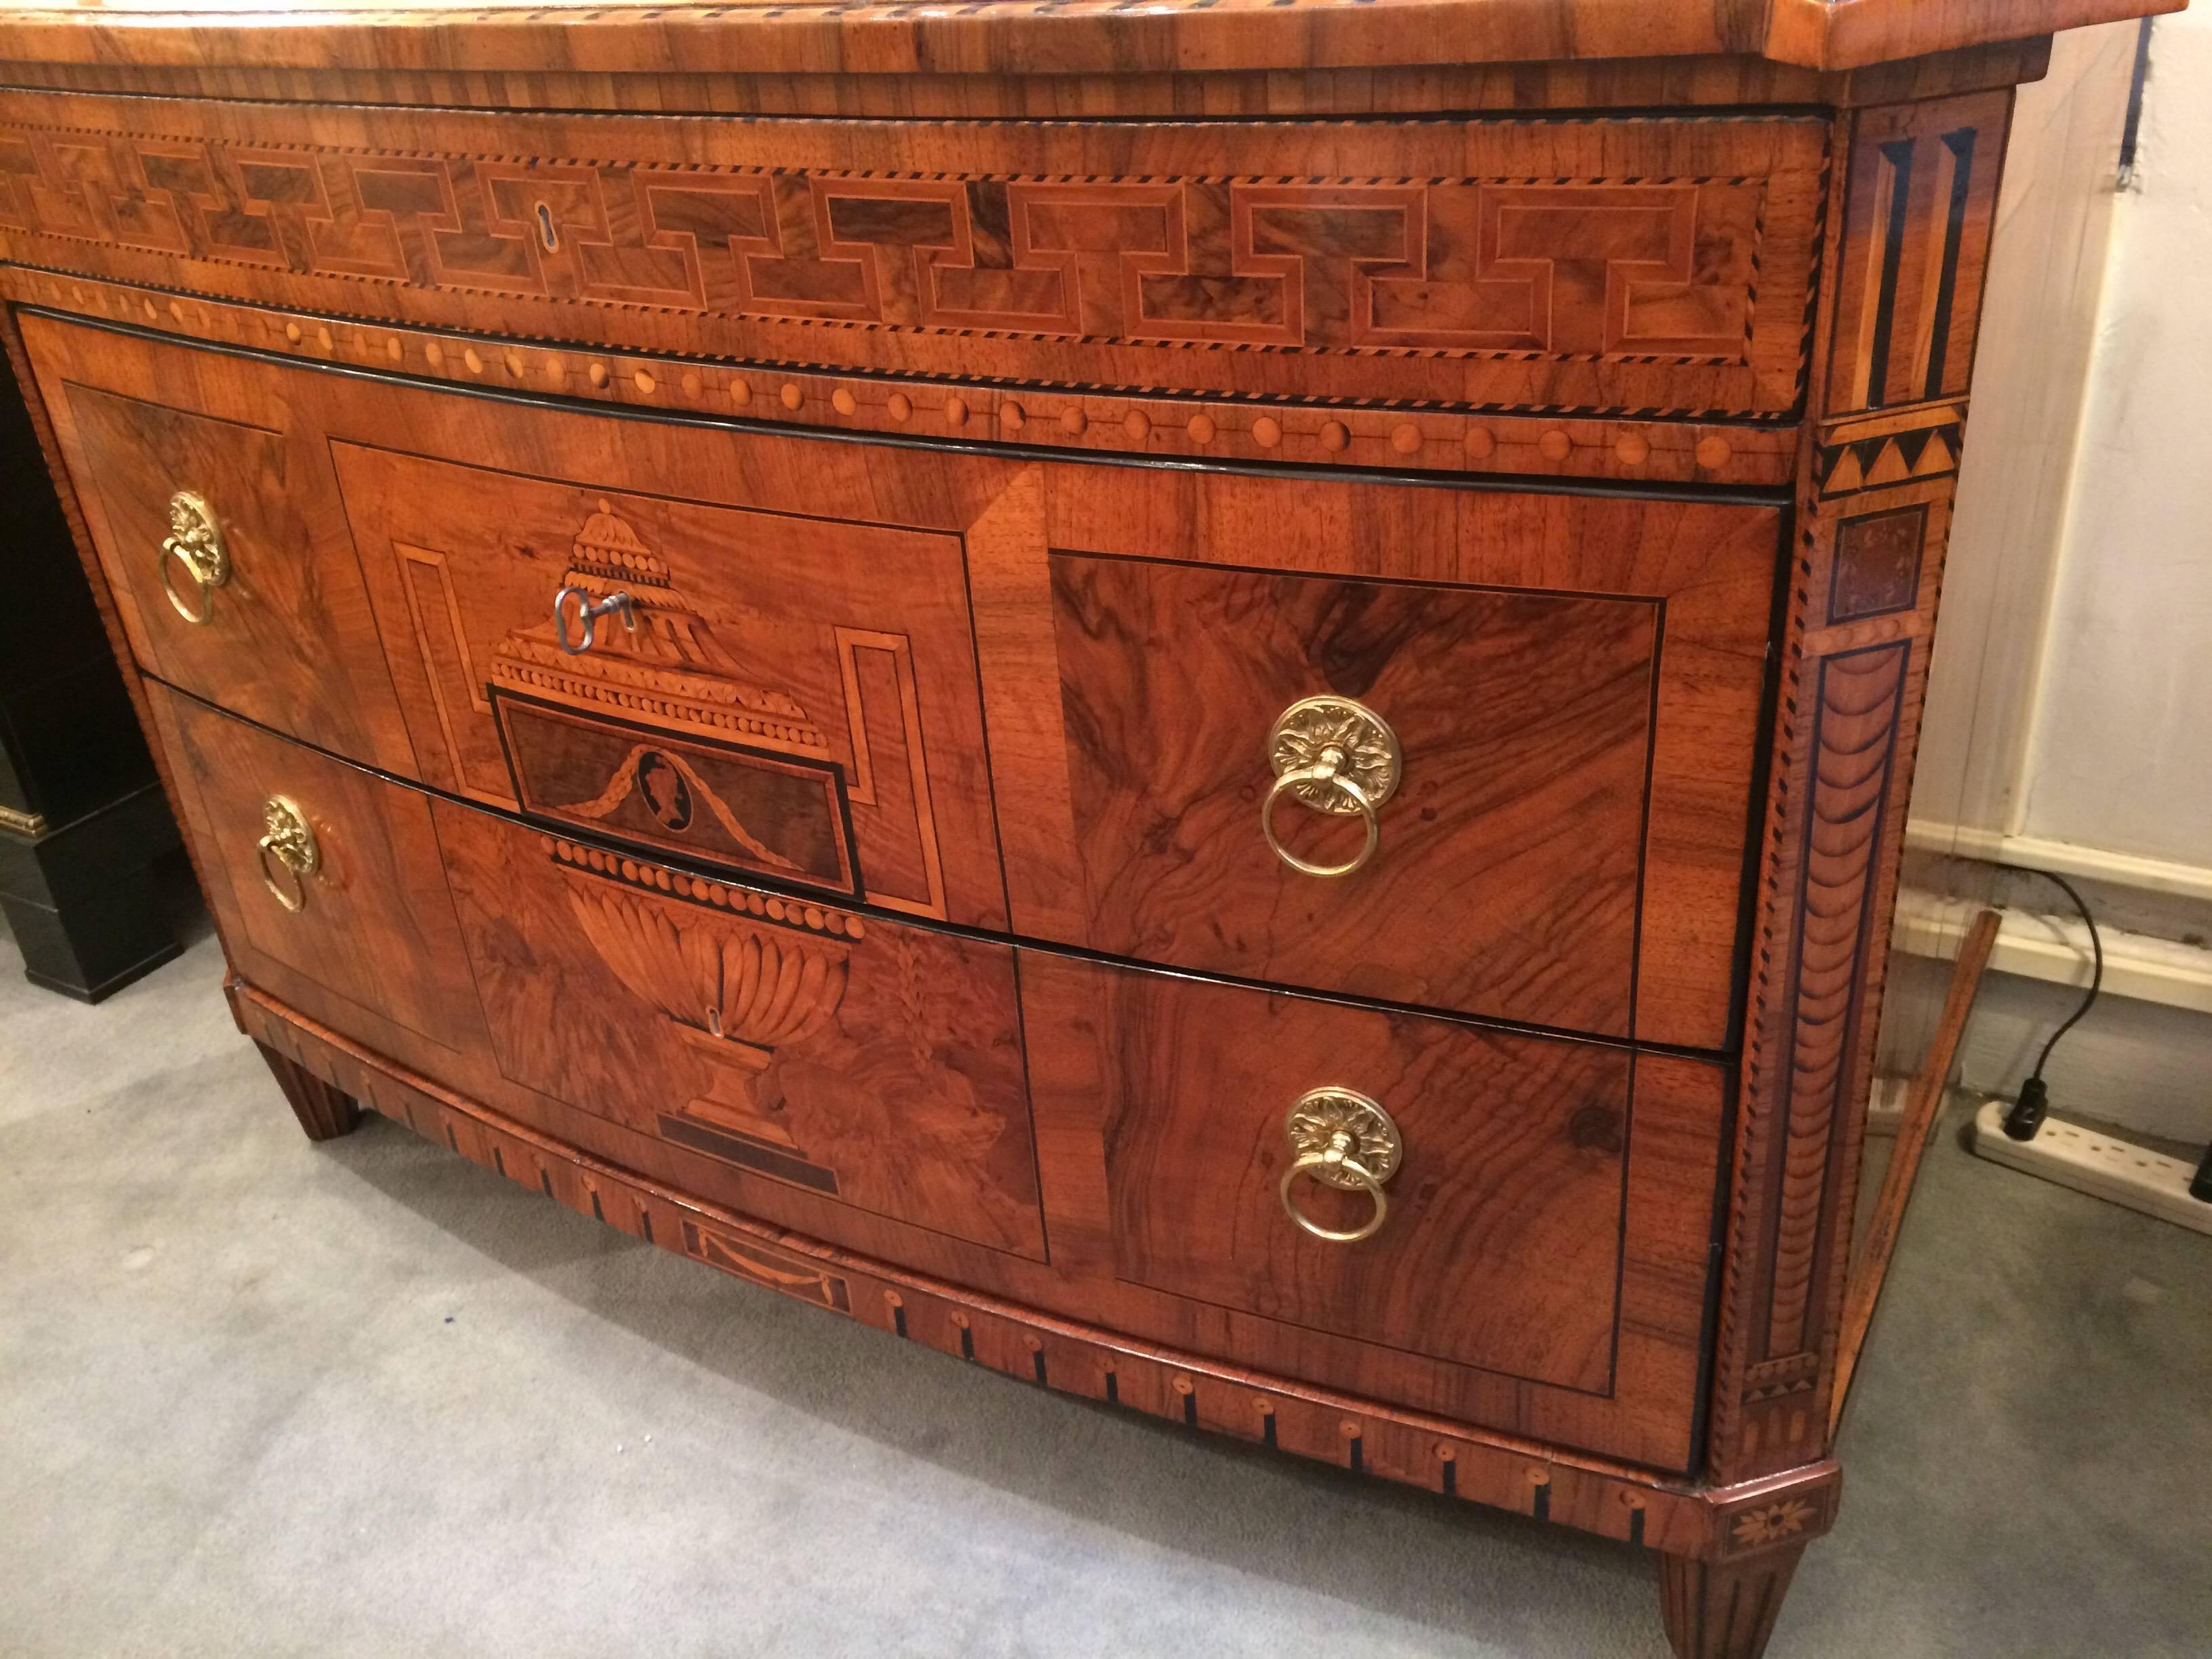 An important neoclassical chest of two drawers.
In walnut and walnut burl, with meticulous fruitwood and ebony inlay and marquetry details, patinated bronze pulls.
Dresden.